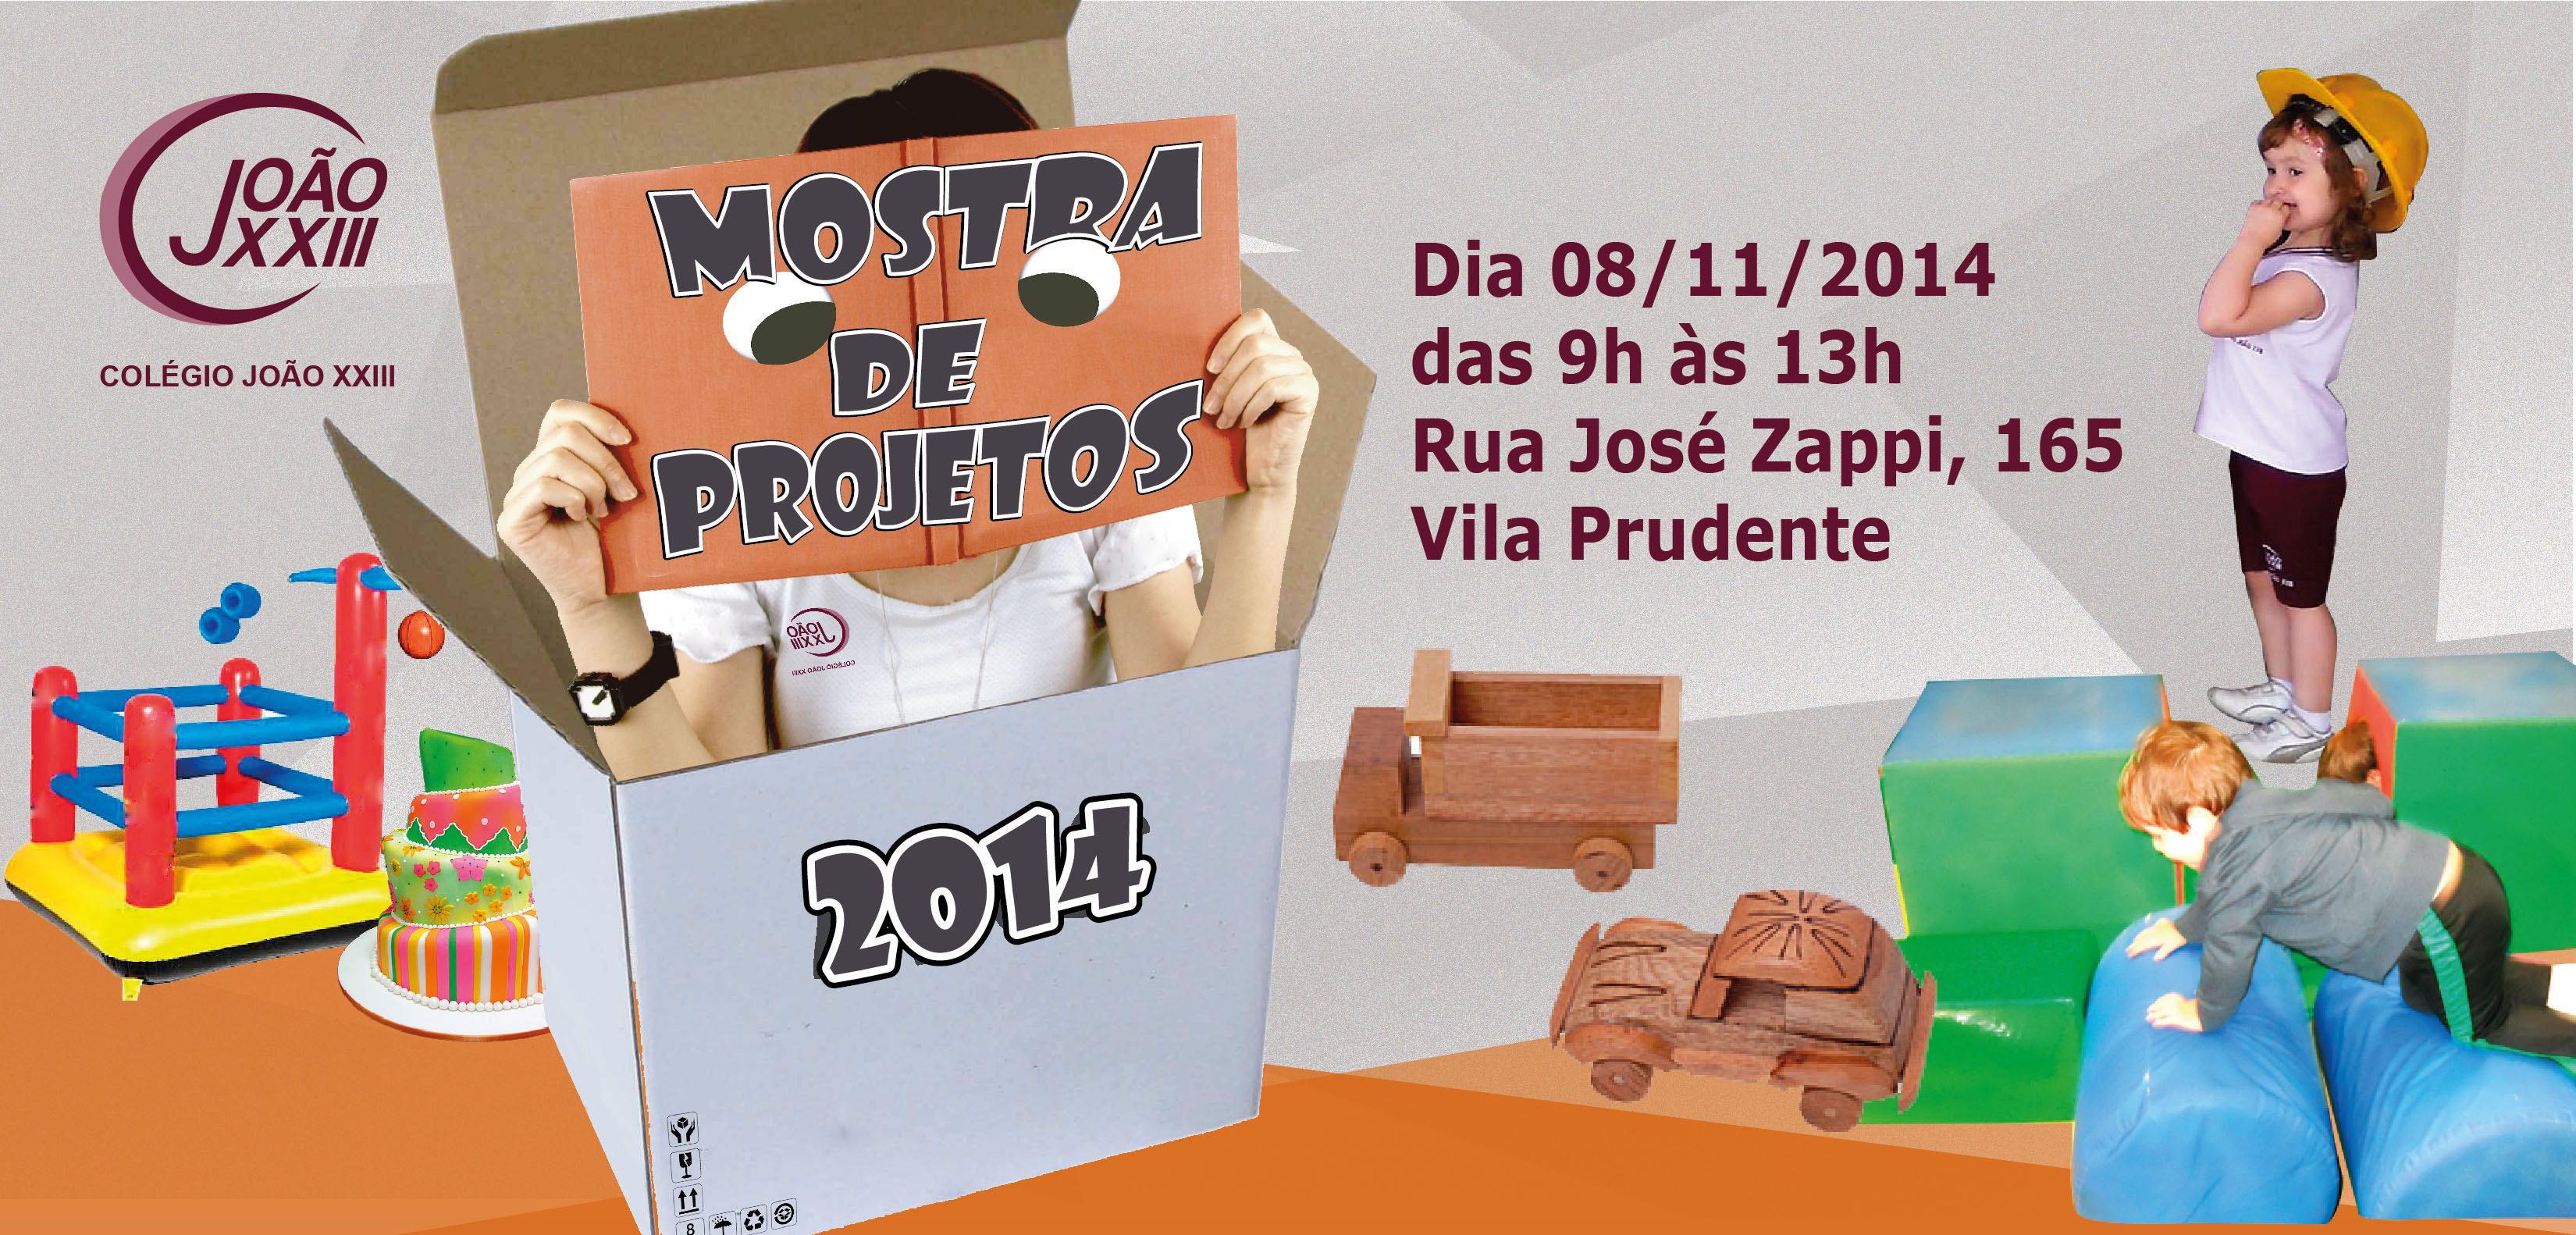 You are currently viewing Mostra de Projetos 2014